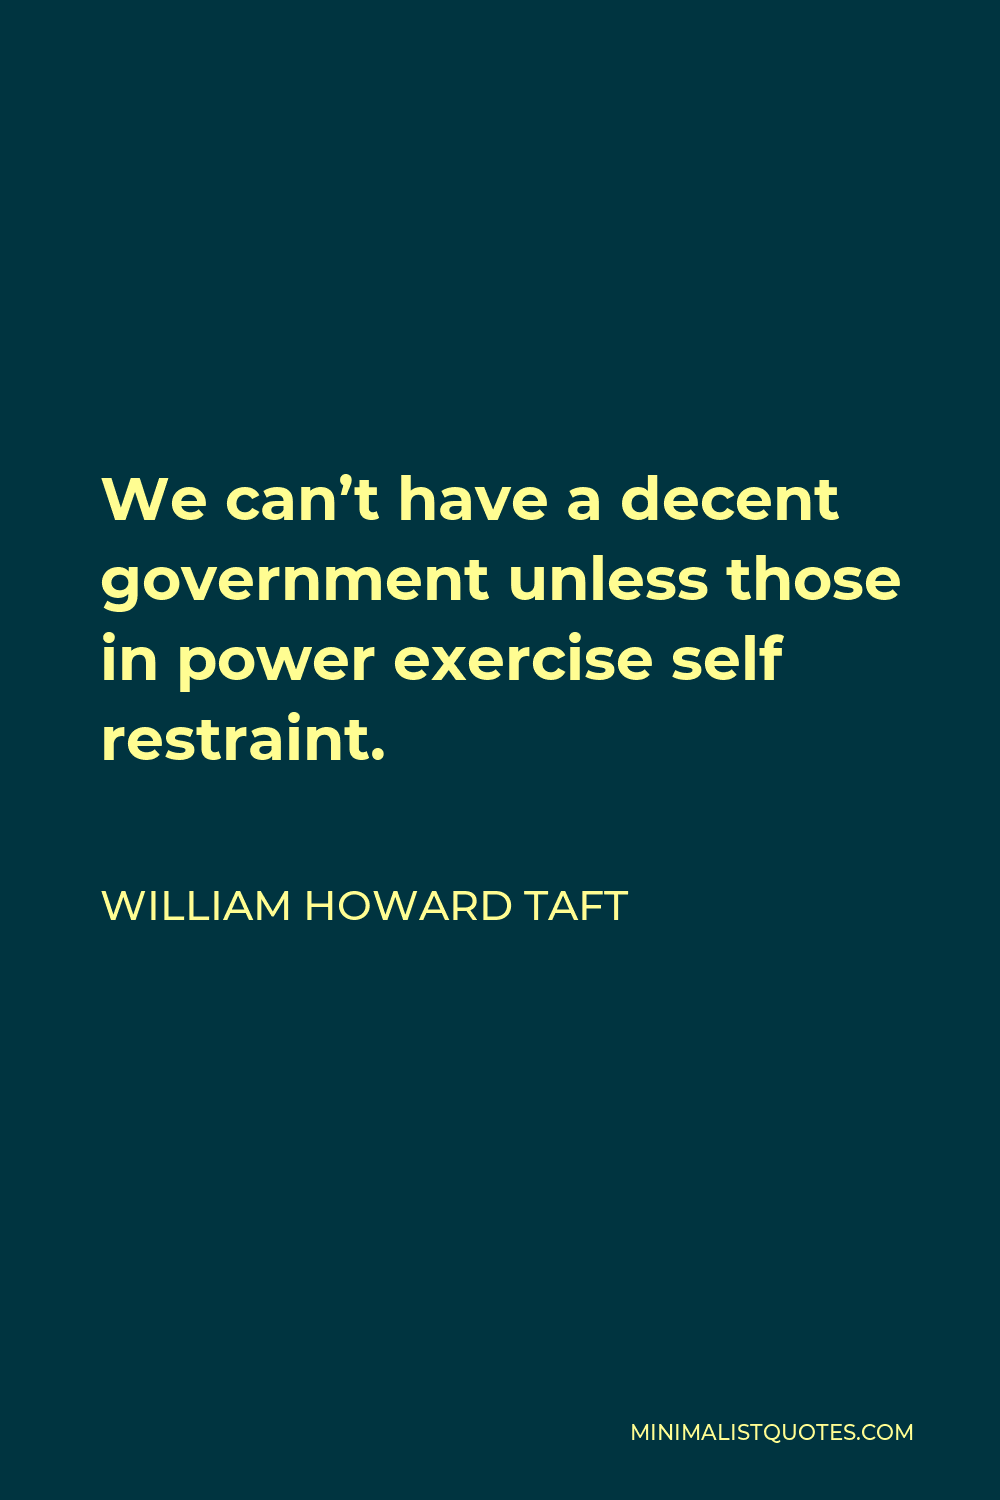 William Howard Taft Quote - We can’t have a decent government unless those in power exercise self restraint.